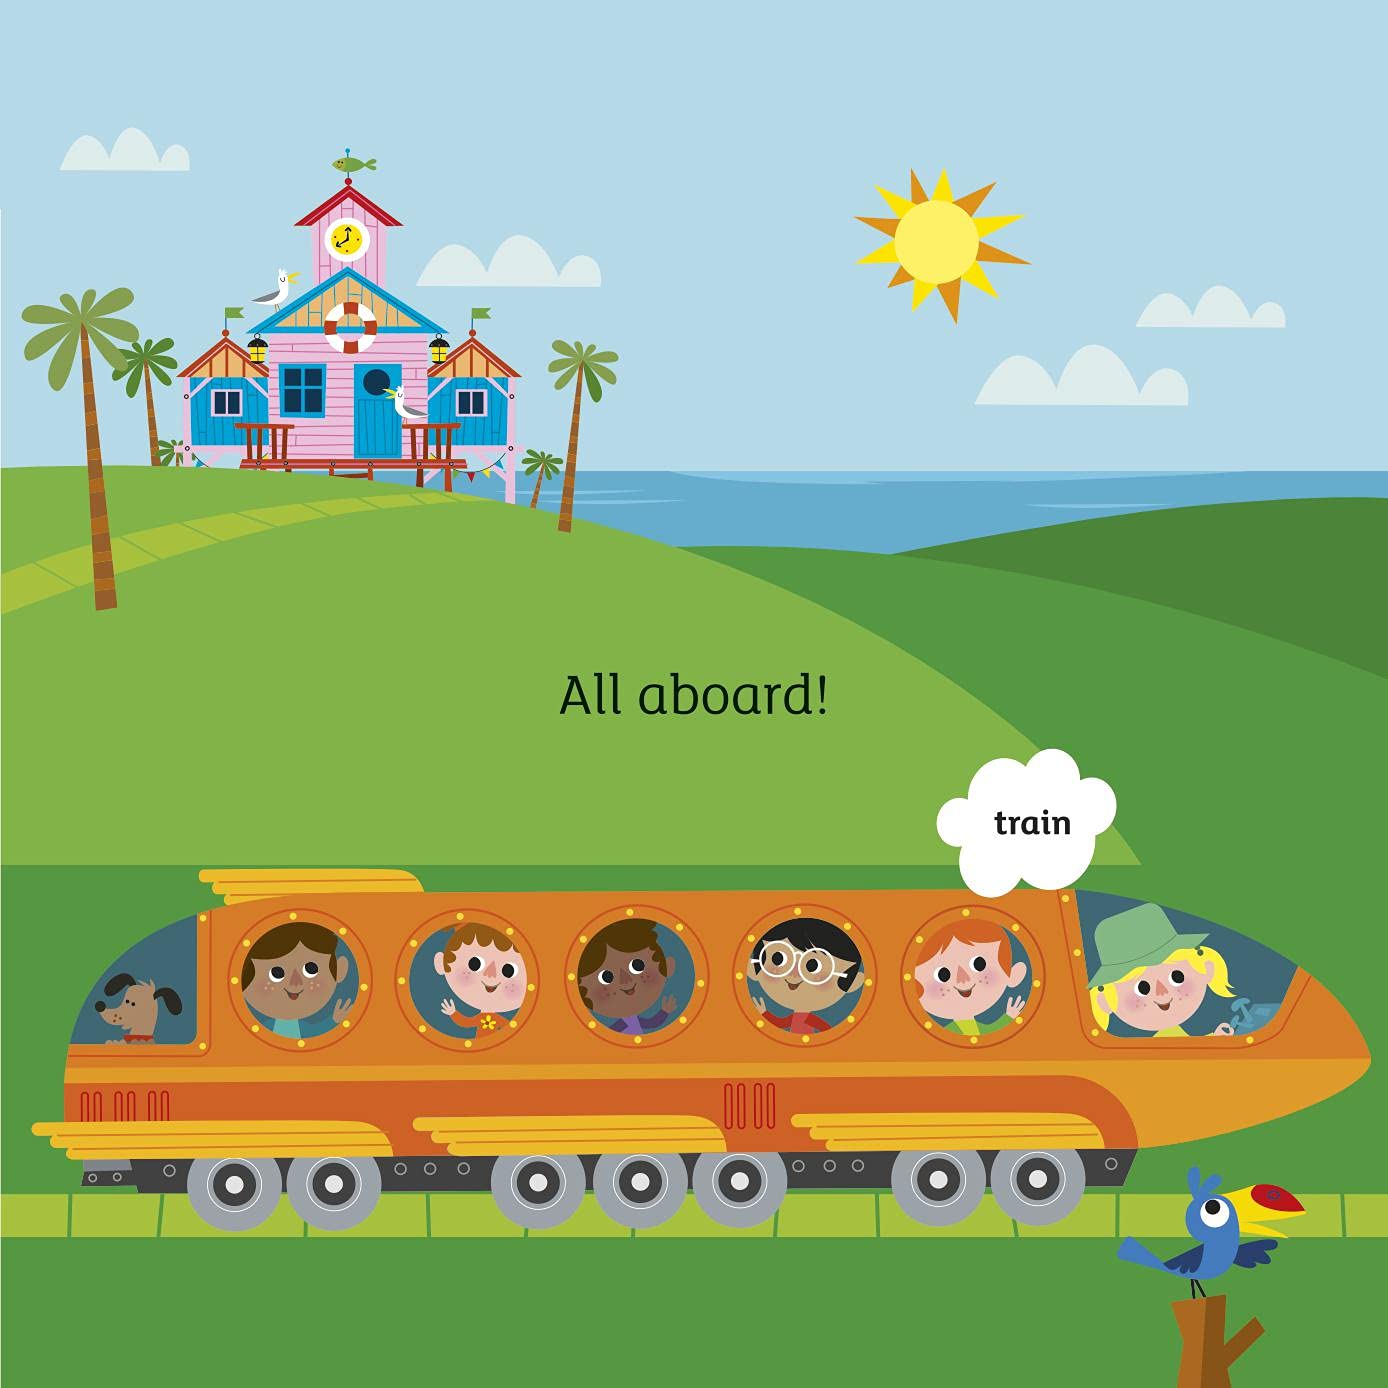 All Aboard the Words Train | Paperback | Early Learning for Children